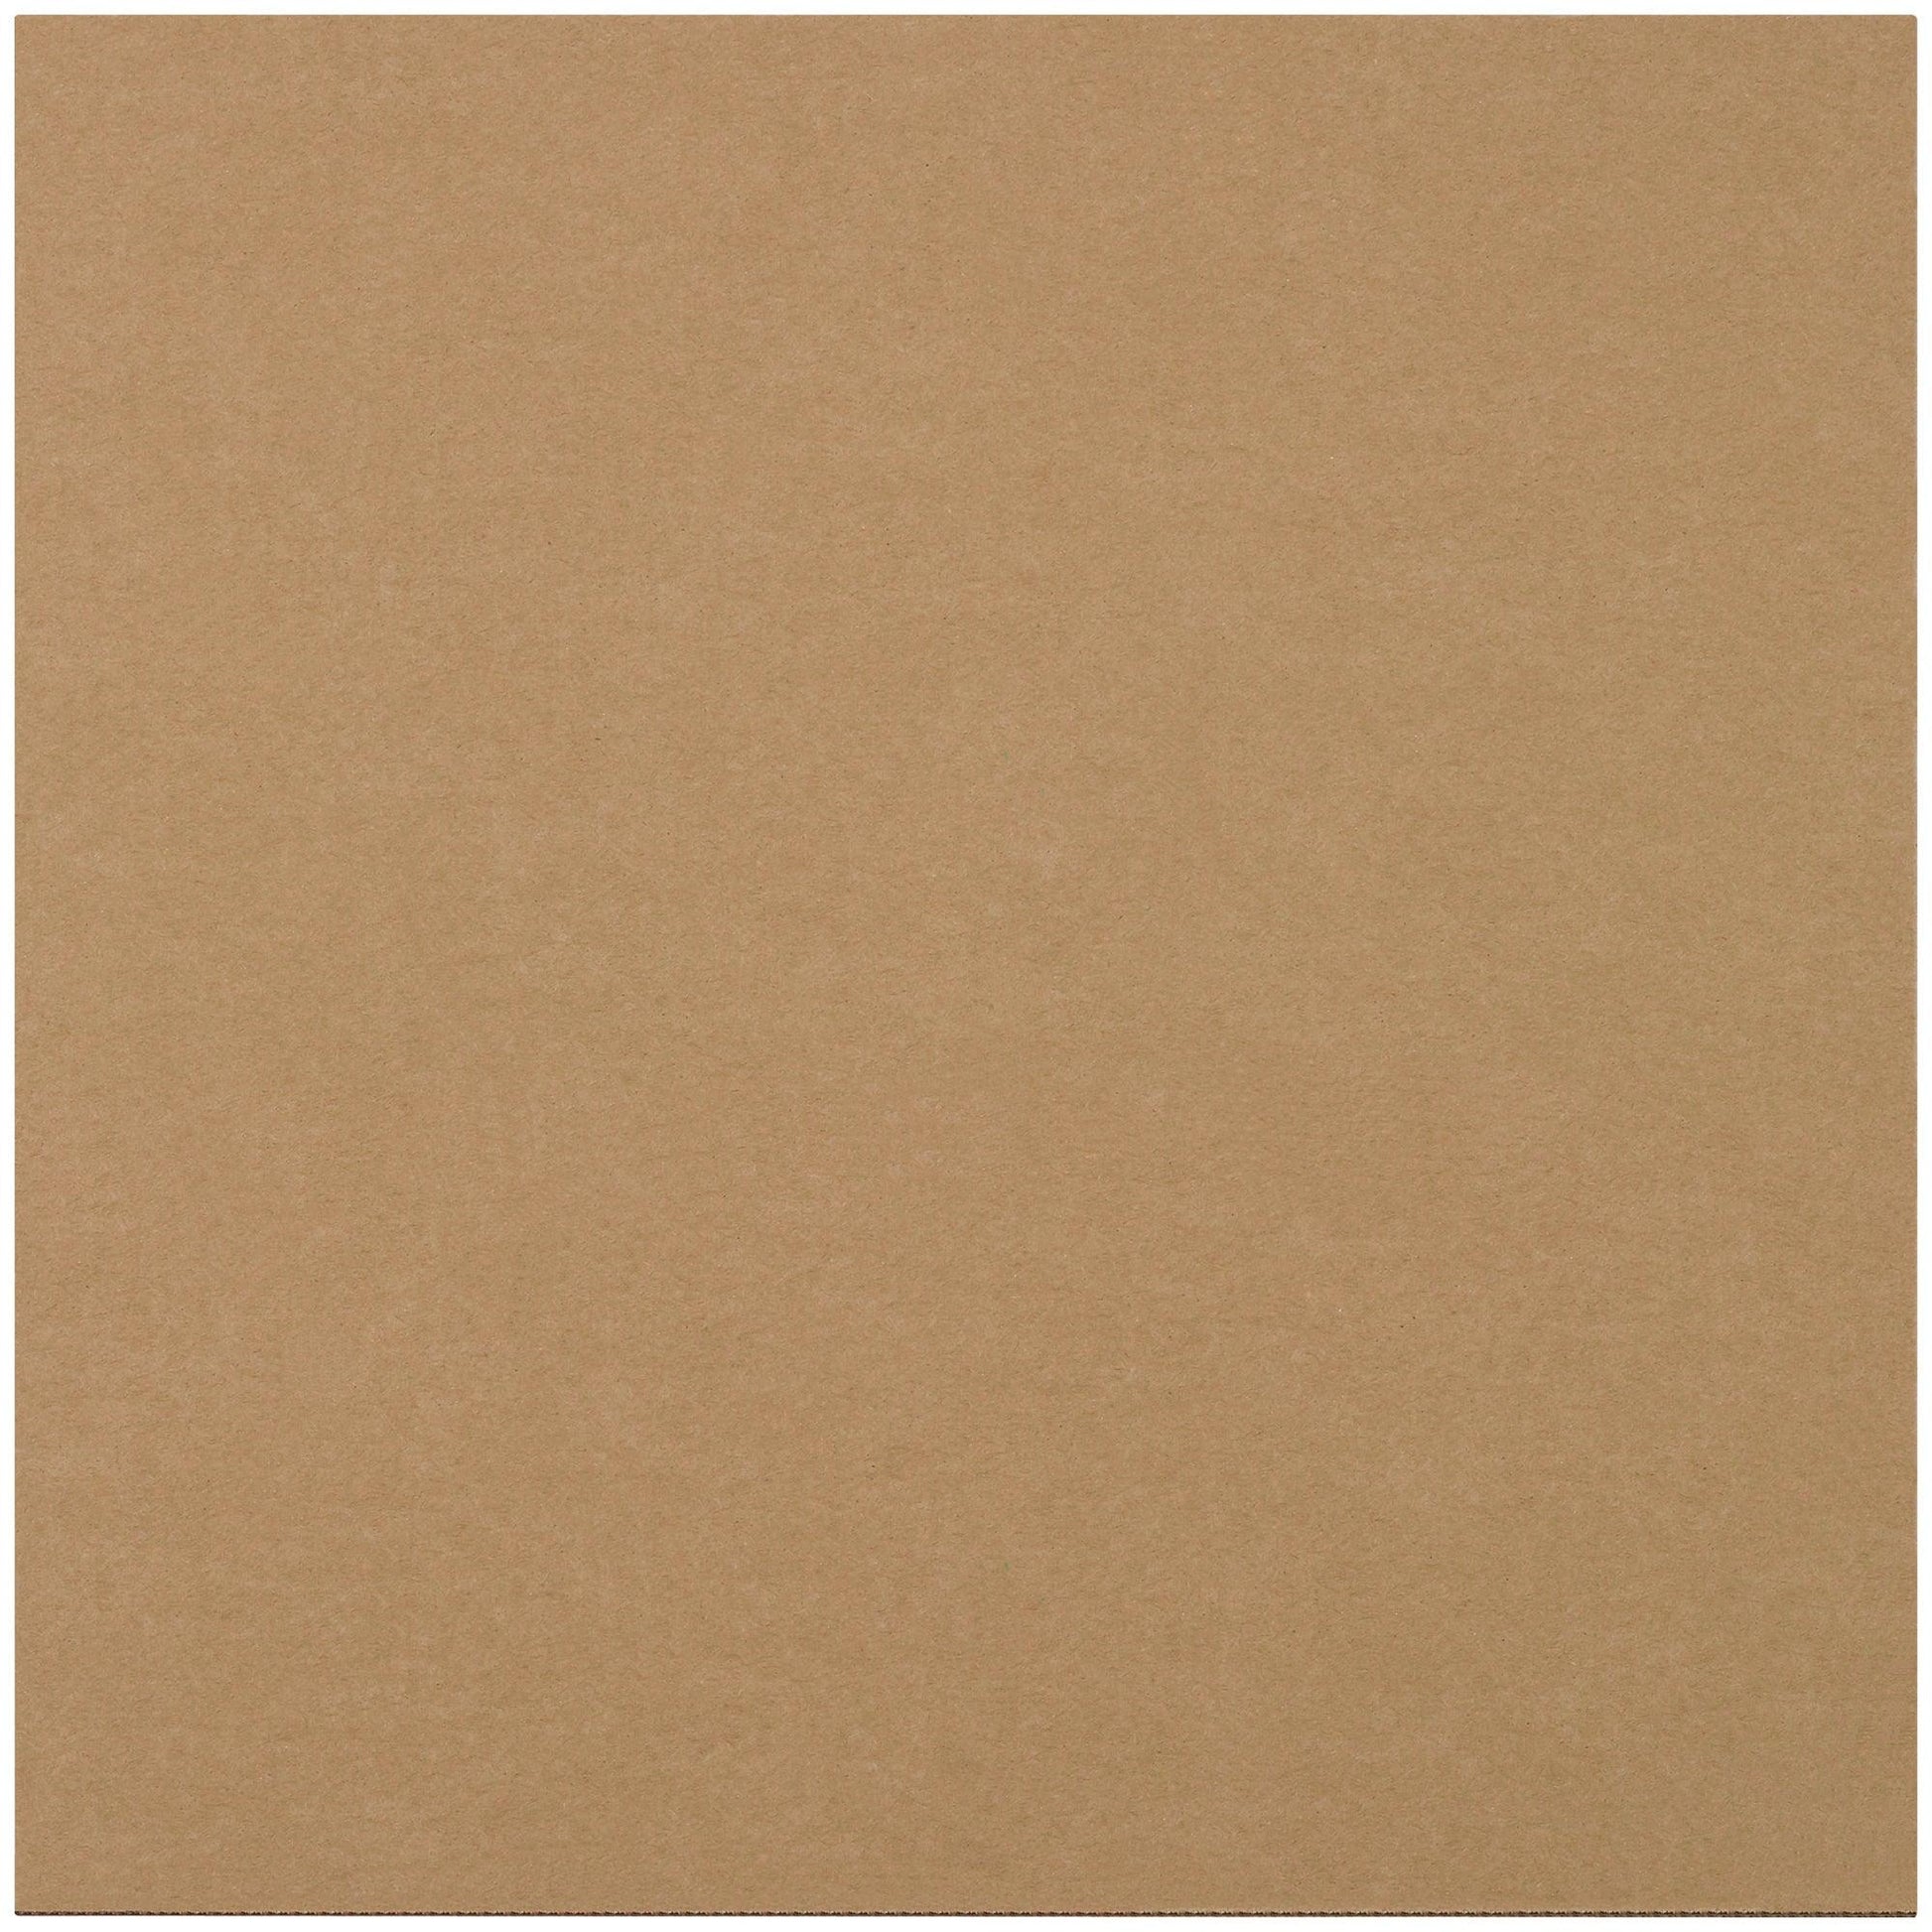 17 7/8 x 17 7/8" Corrugated Layer Pads - SP17